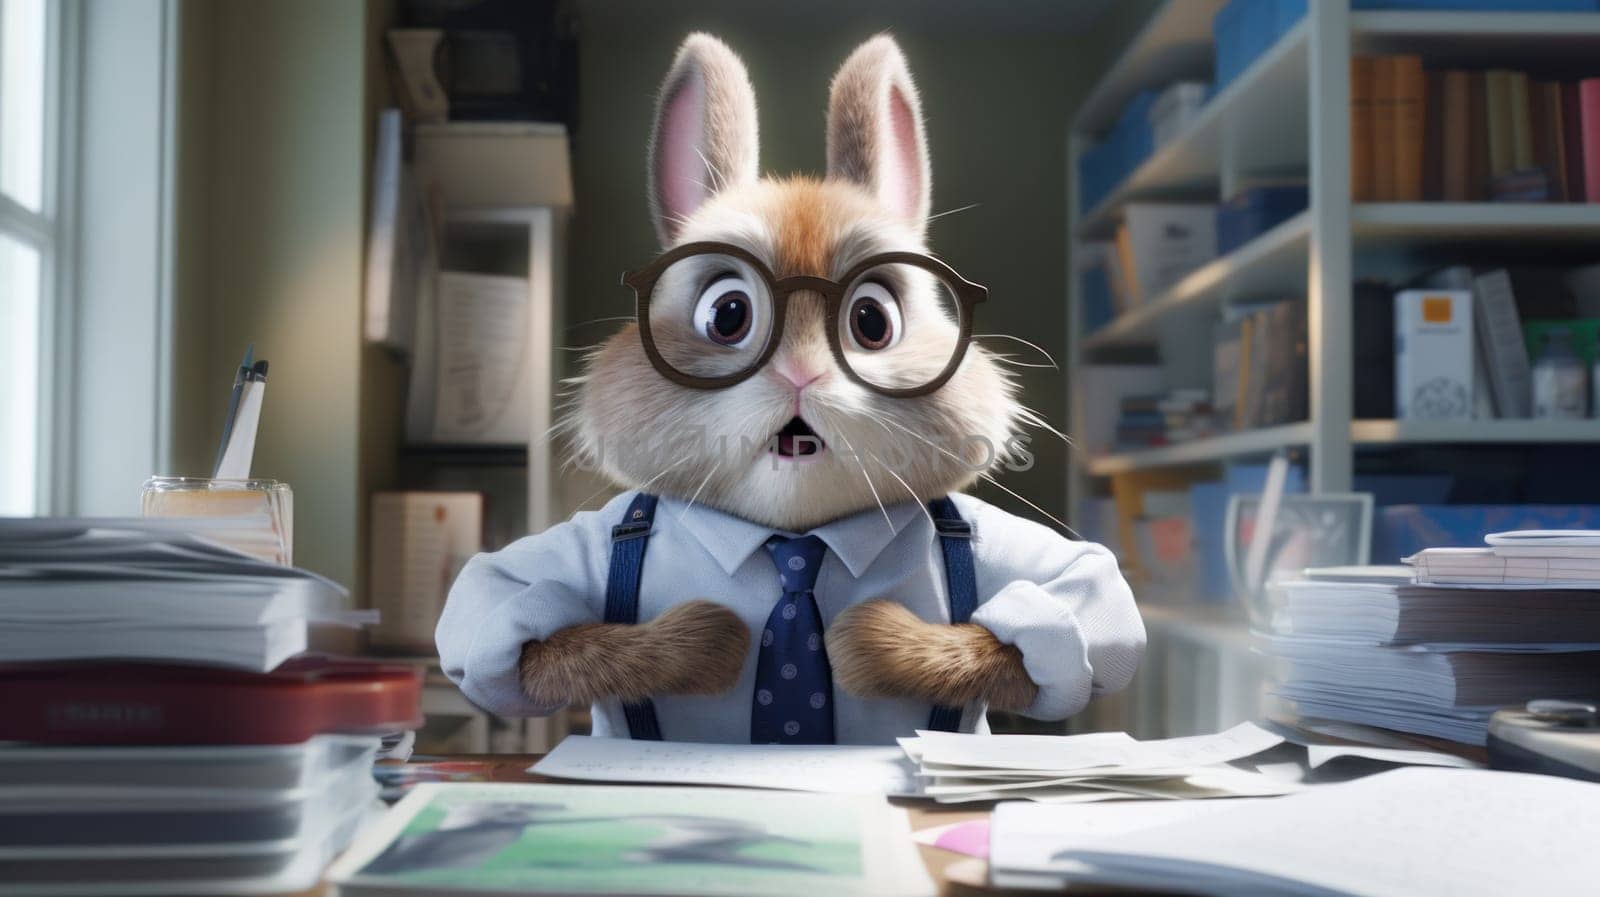 A rabbit in glasses and a tie sitting at a desk